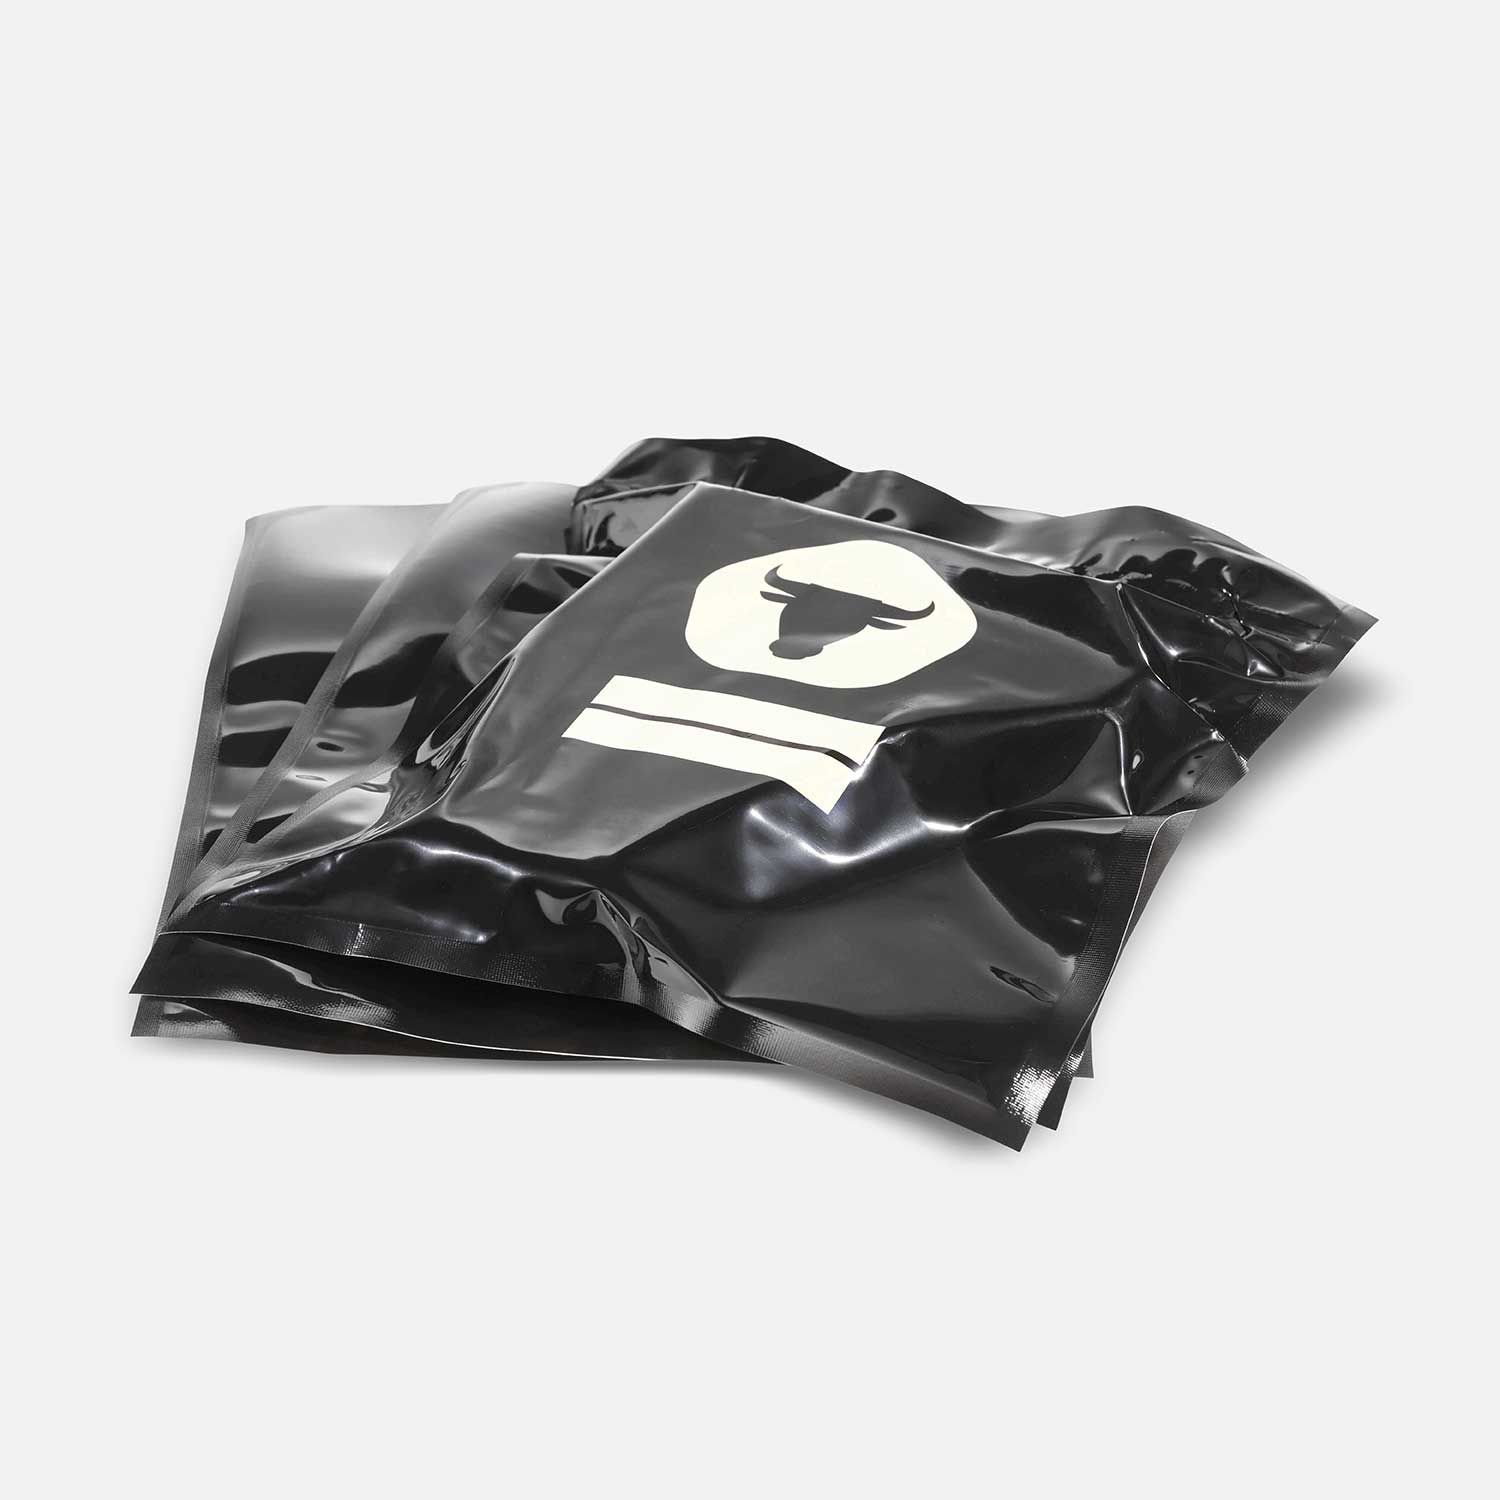 Black vacuum bags with dry ager logo with vacuumed T-Bone steak